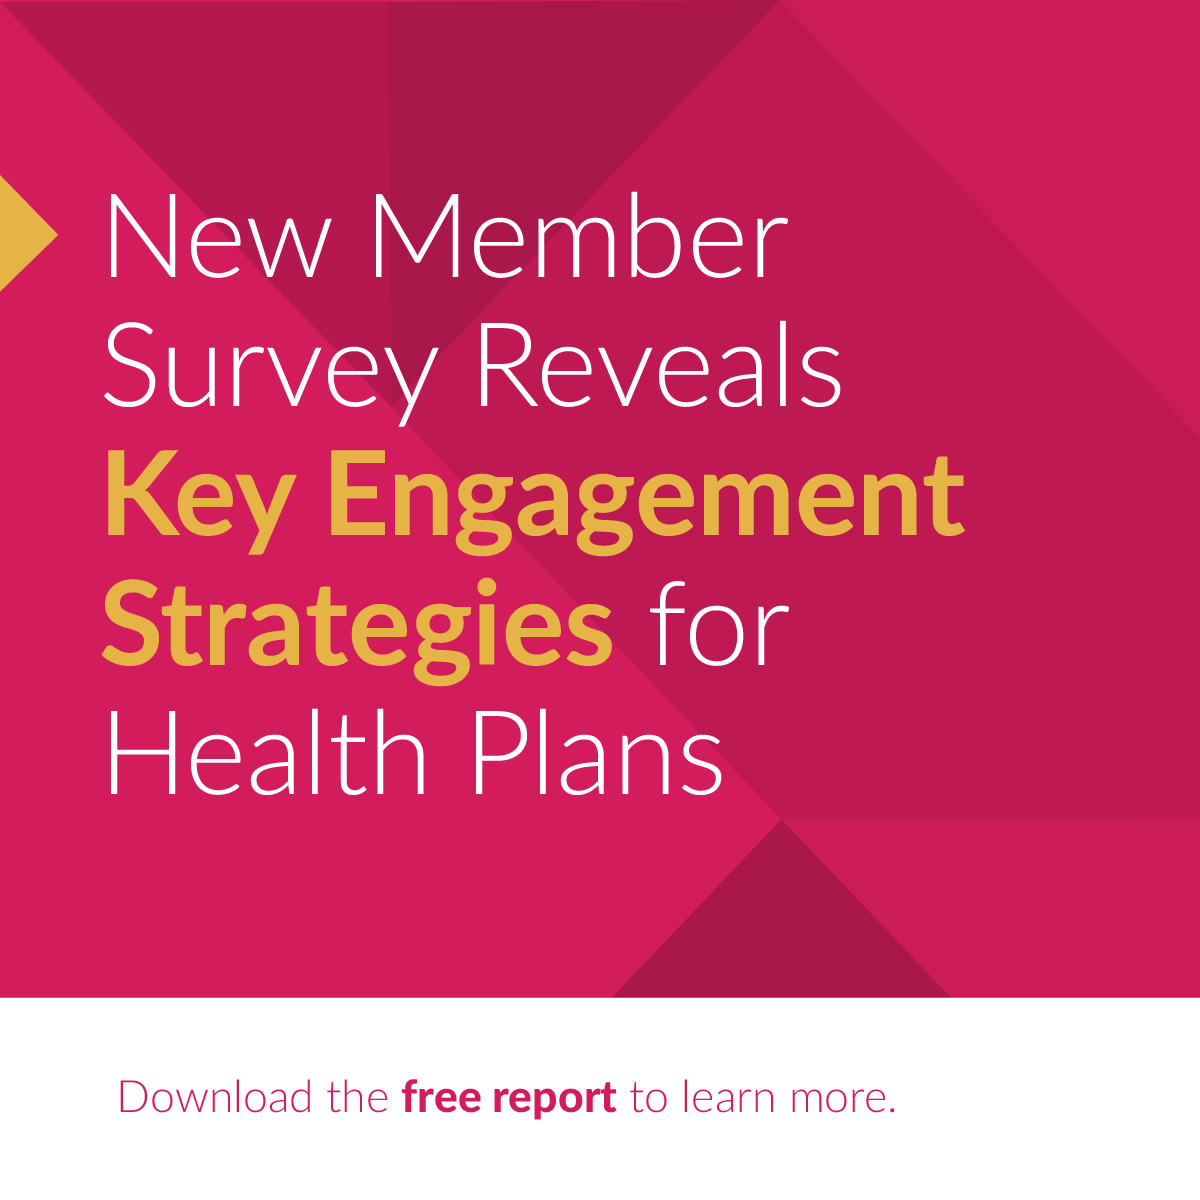 Today's consumers demand a better health plan experience. Our latest survey uncovers some surprising findings to help payers understand what members really want. Download the free report to learn more. hubs.ly/Q01_41d90